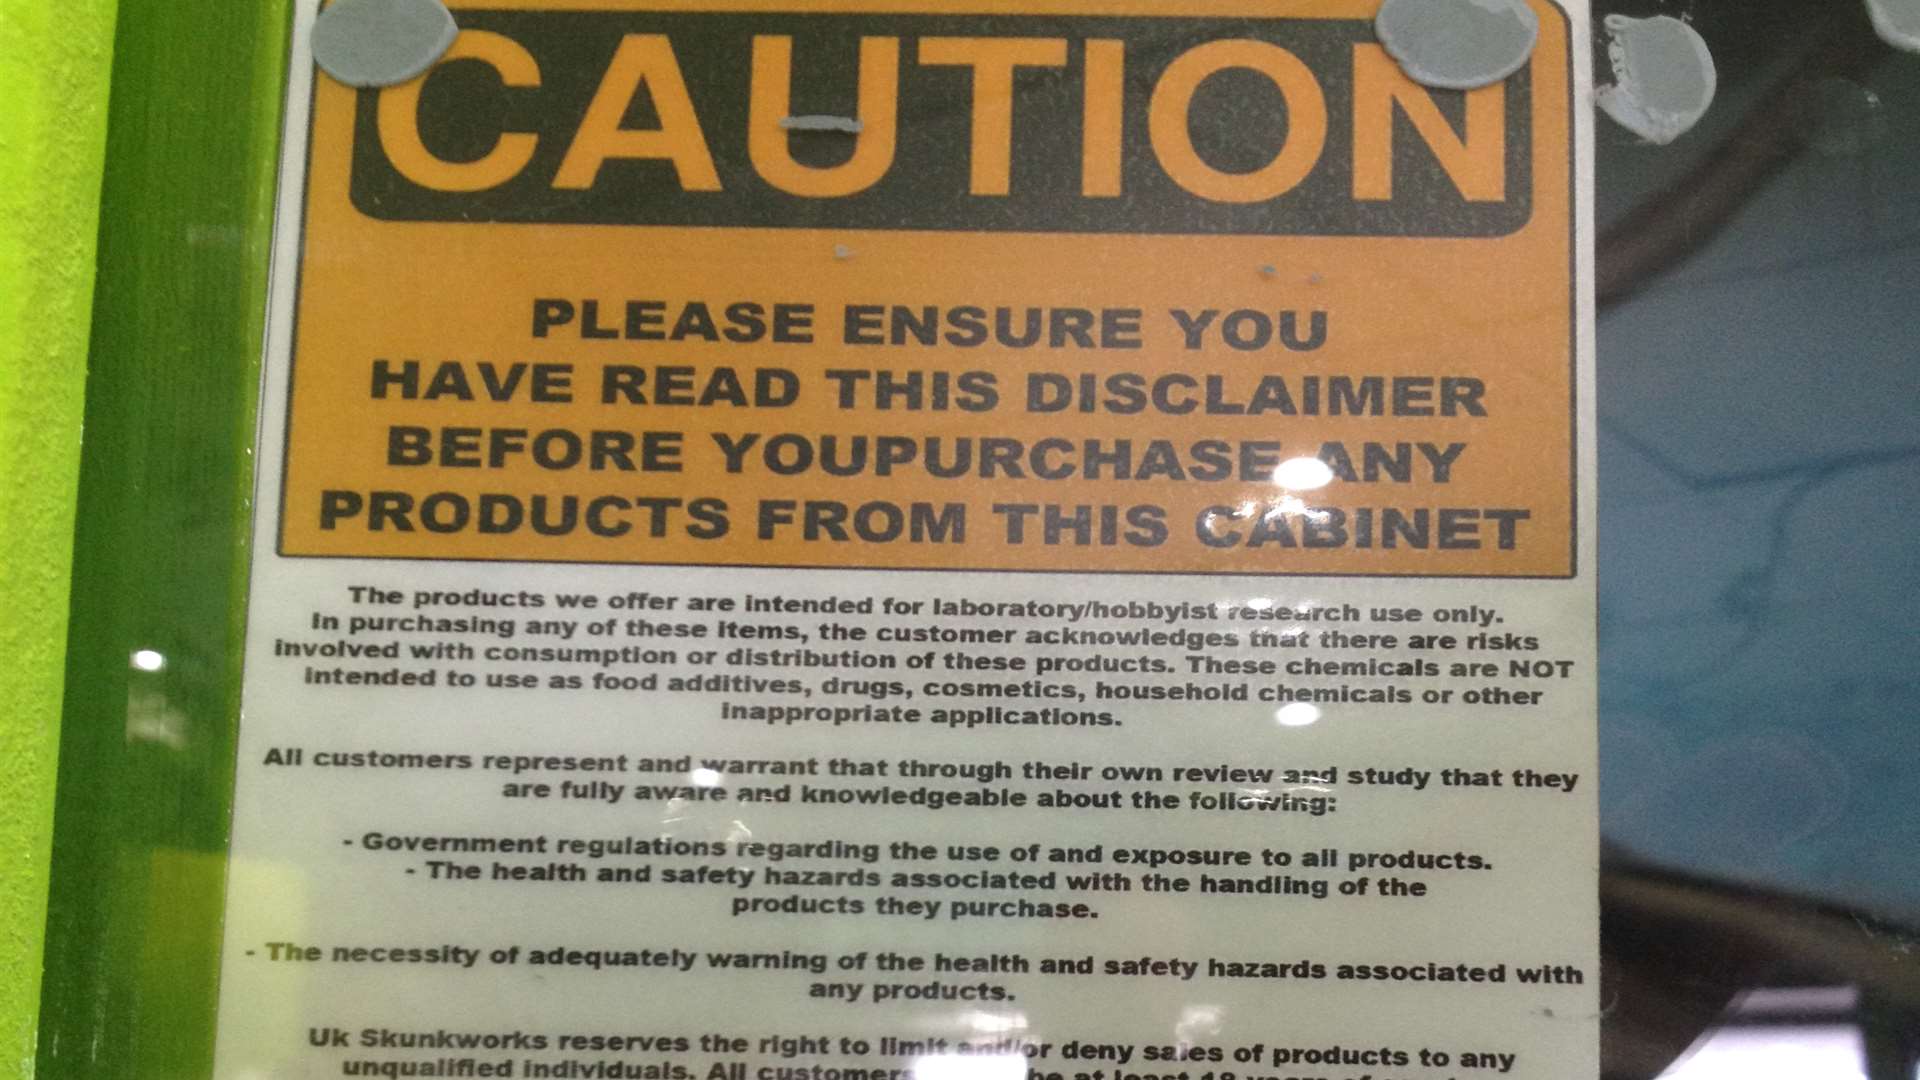 A warning notice to customers